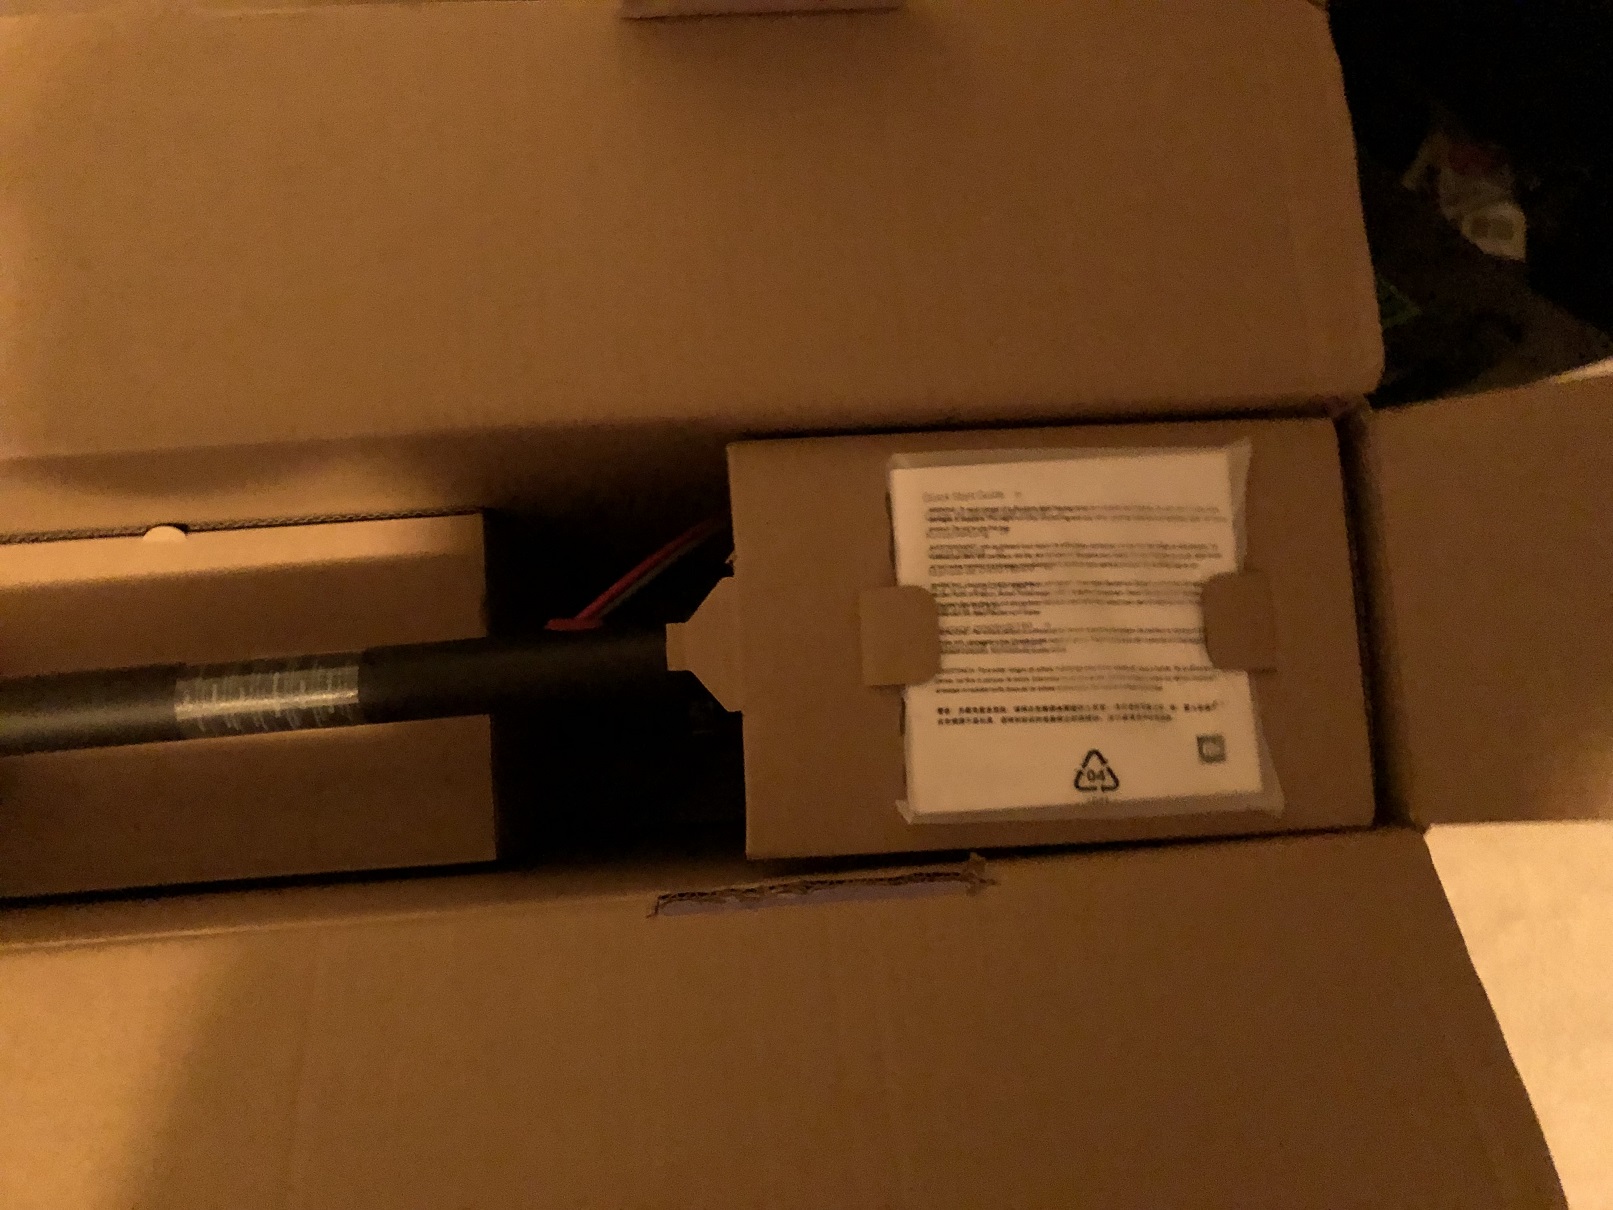 Mi Electric Scooter Unboxing